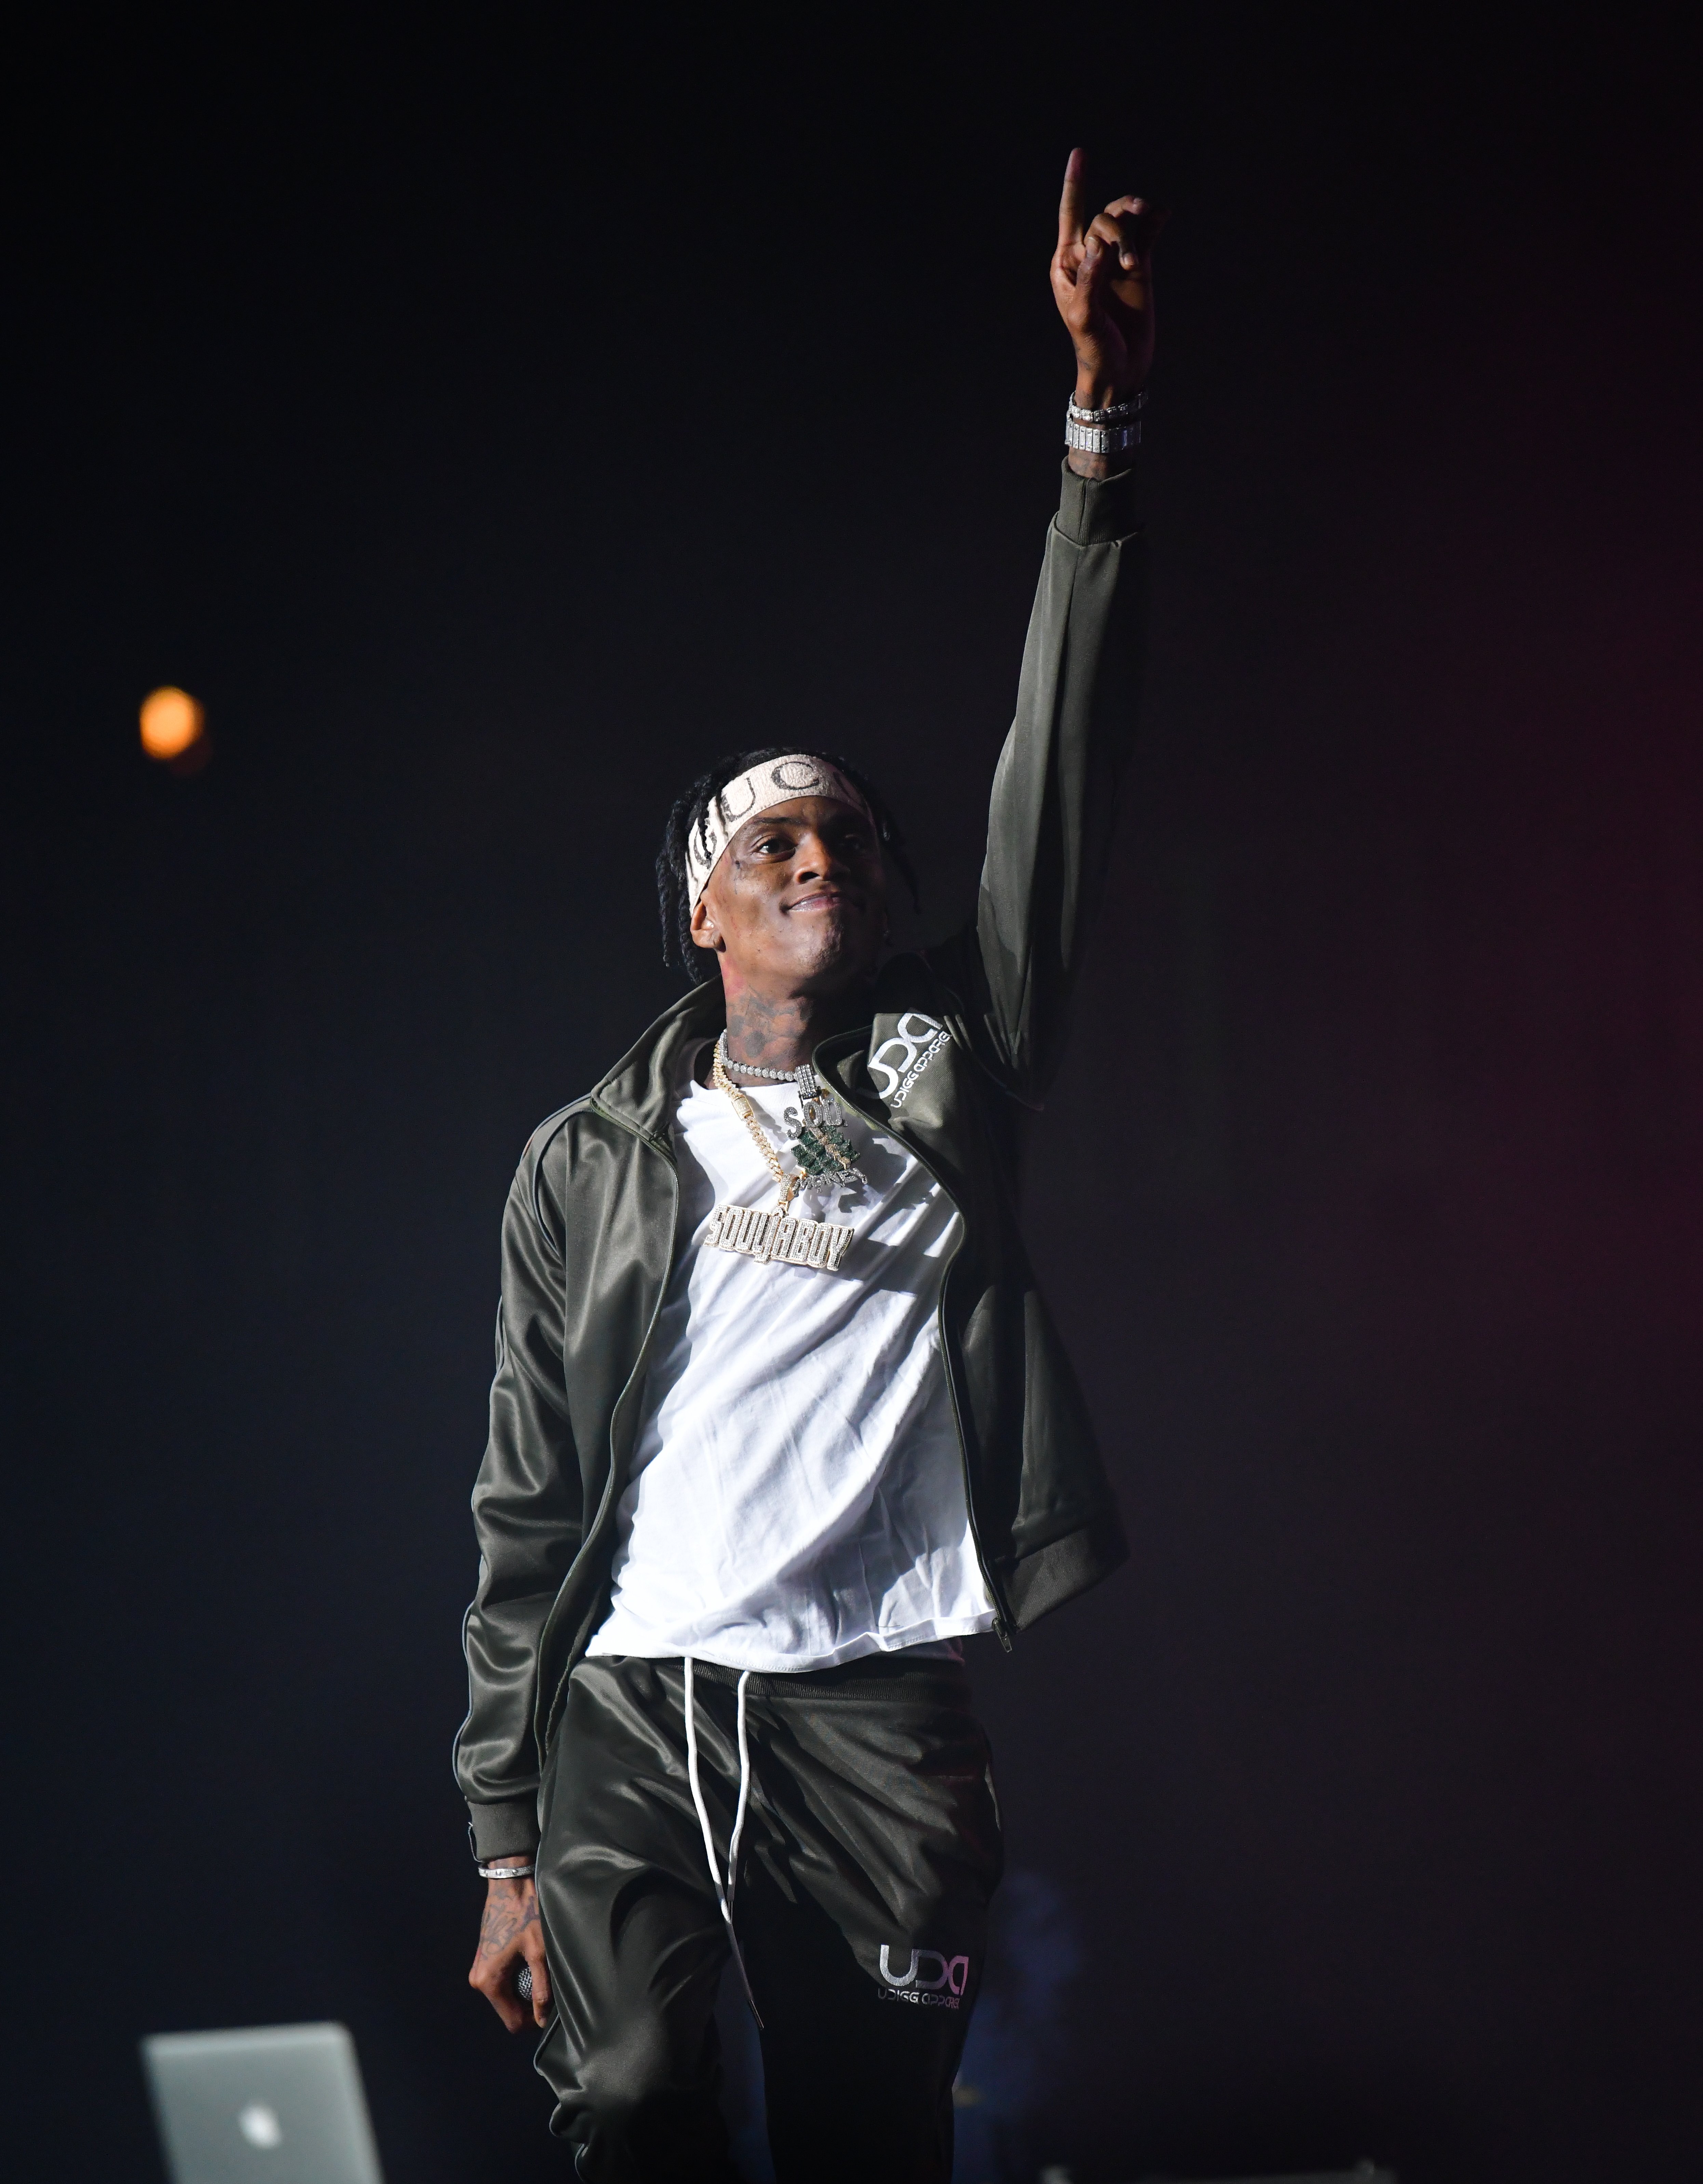 Soulja Boy performing during The Millennium Tour in Atlanta, Georgia on October 16, 2021 | Source: Getty Images 